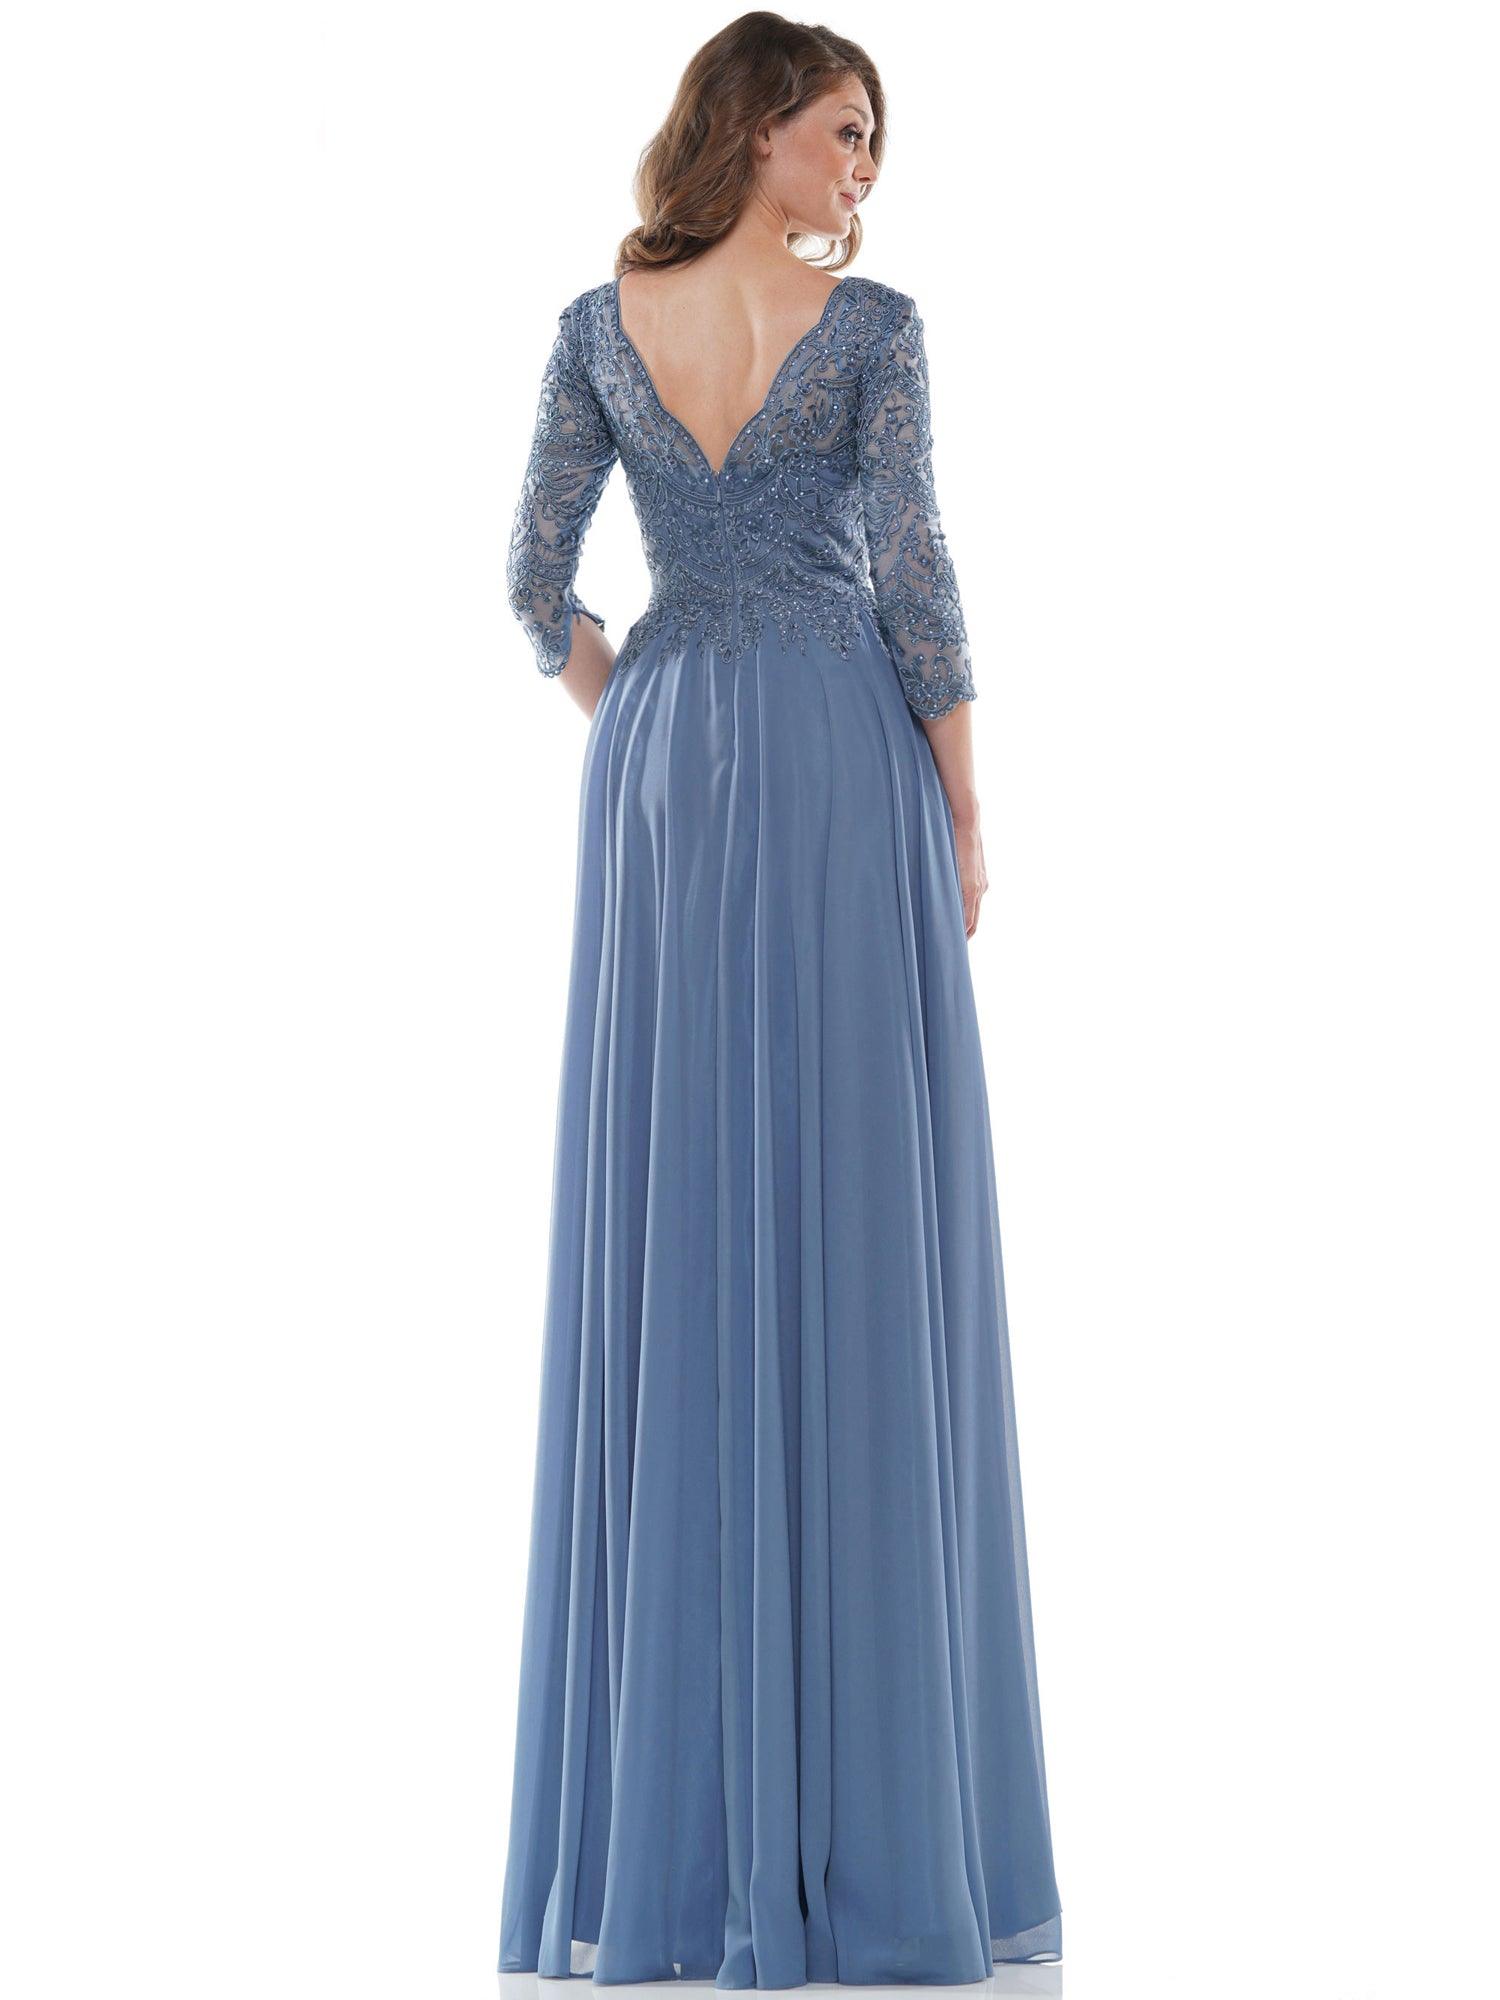 Marsoni Mother of the Bride Long Formal Dress 238SL - The Dress Outlet